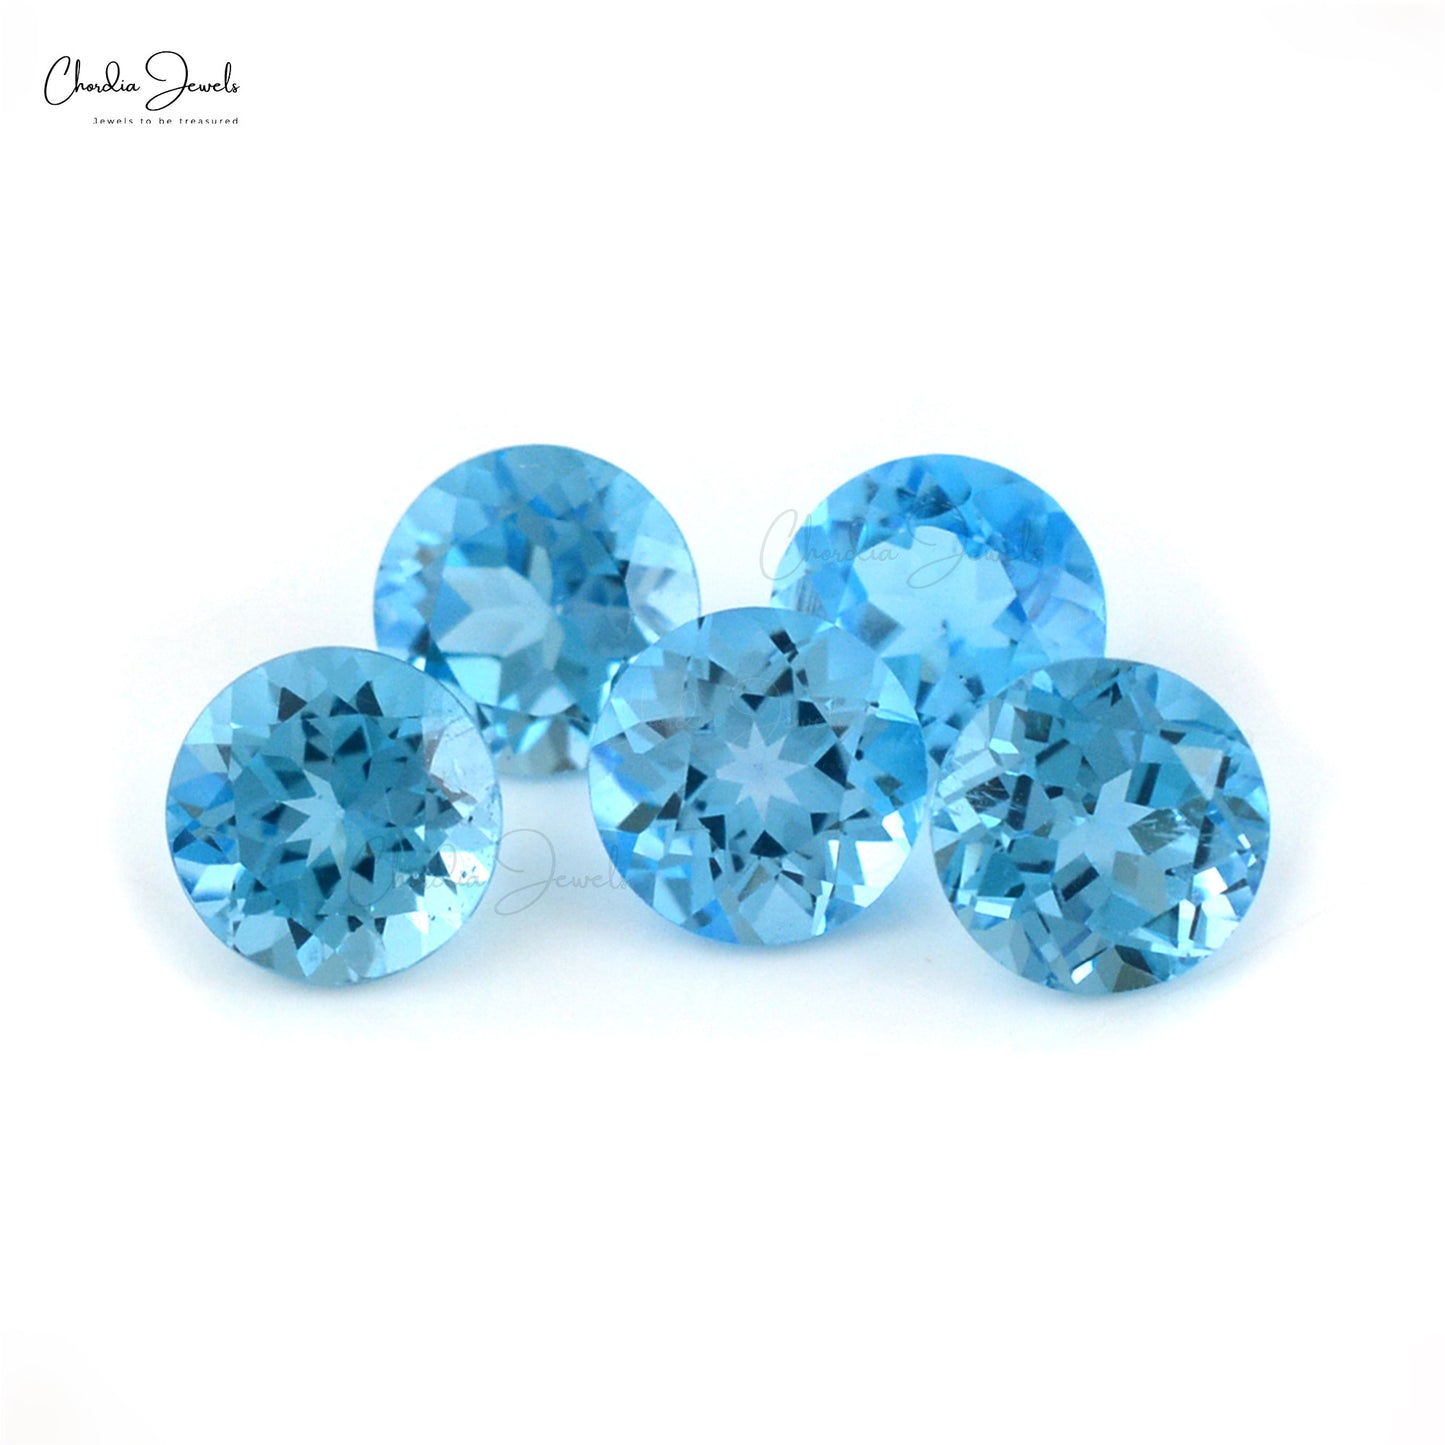 Load image into Gallery viewer, 100% Natural High Quality Swiss Blue Topaz Round Faceted Gemstone, 1 Piece
